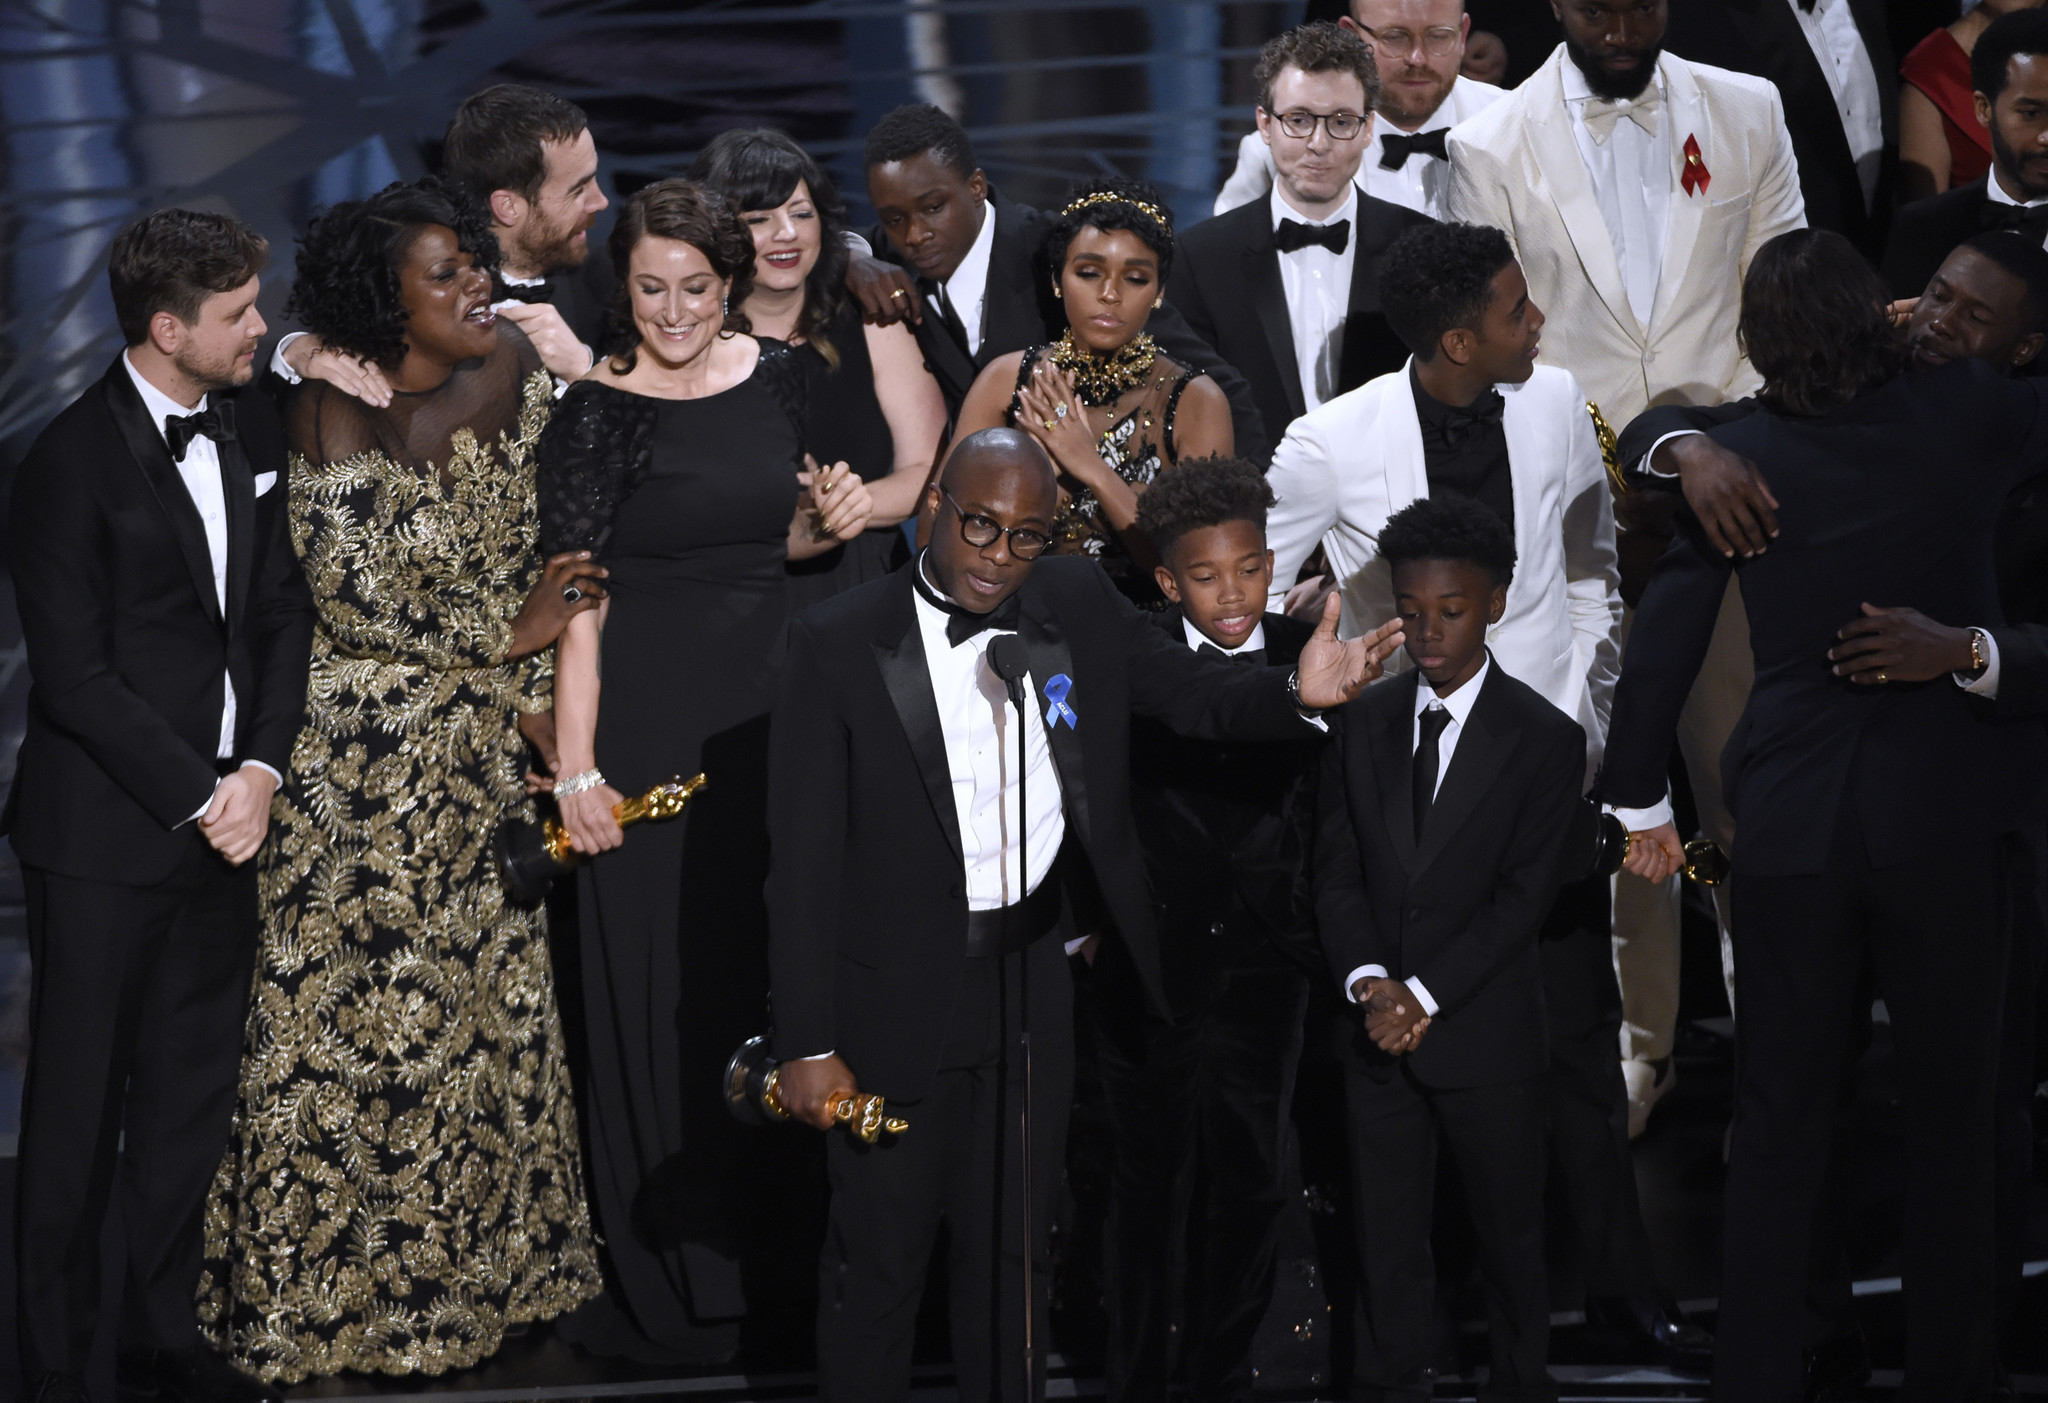 'Moonlight' wins in unprecedented upset during a night of many firsts